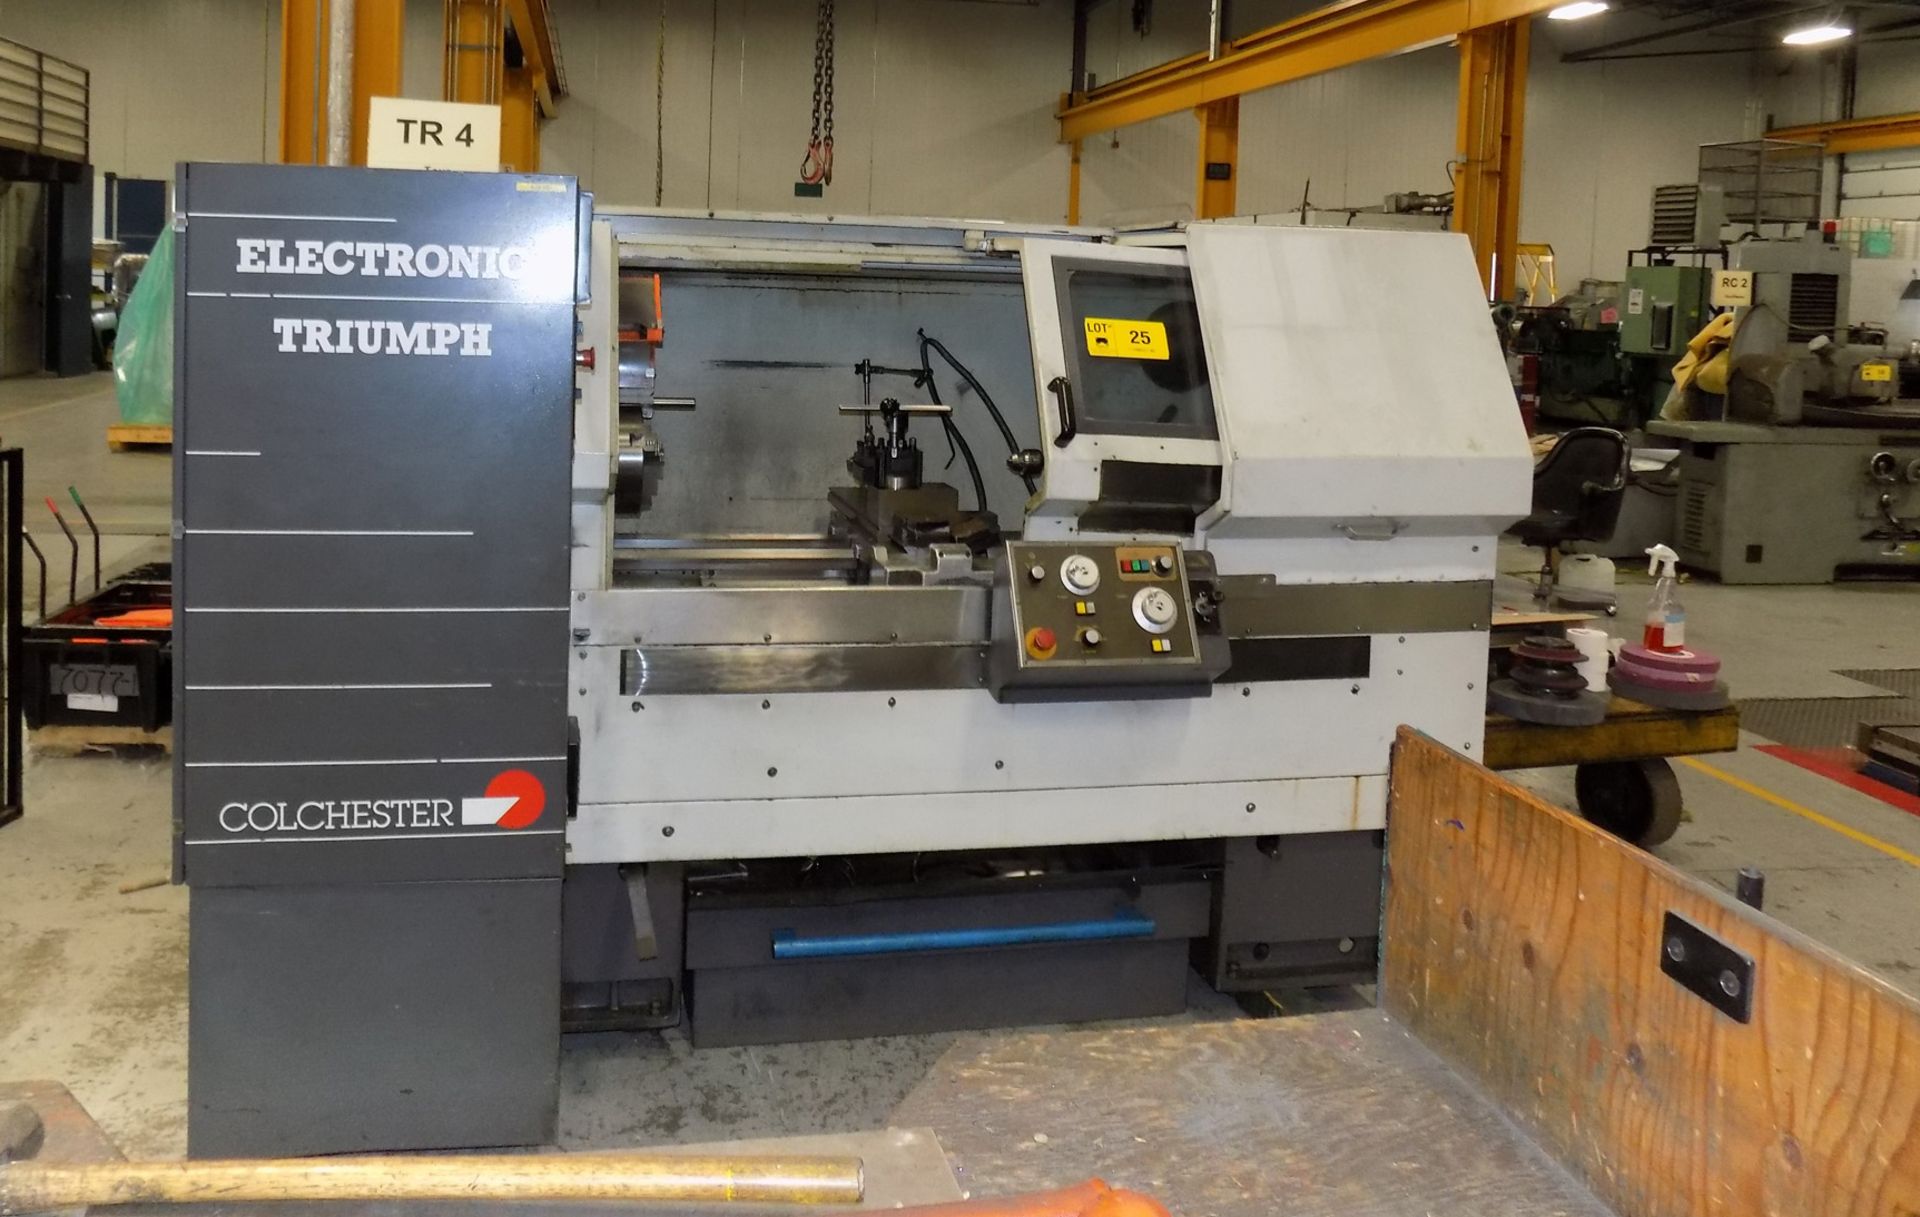 COLCHESTER ELECTRONIC TRIUMPH CNC LATHE WITH FANUC SERIES 20-T CNC CONTROL, 15.75" SWING OVER BED, - Image 3 of 9